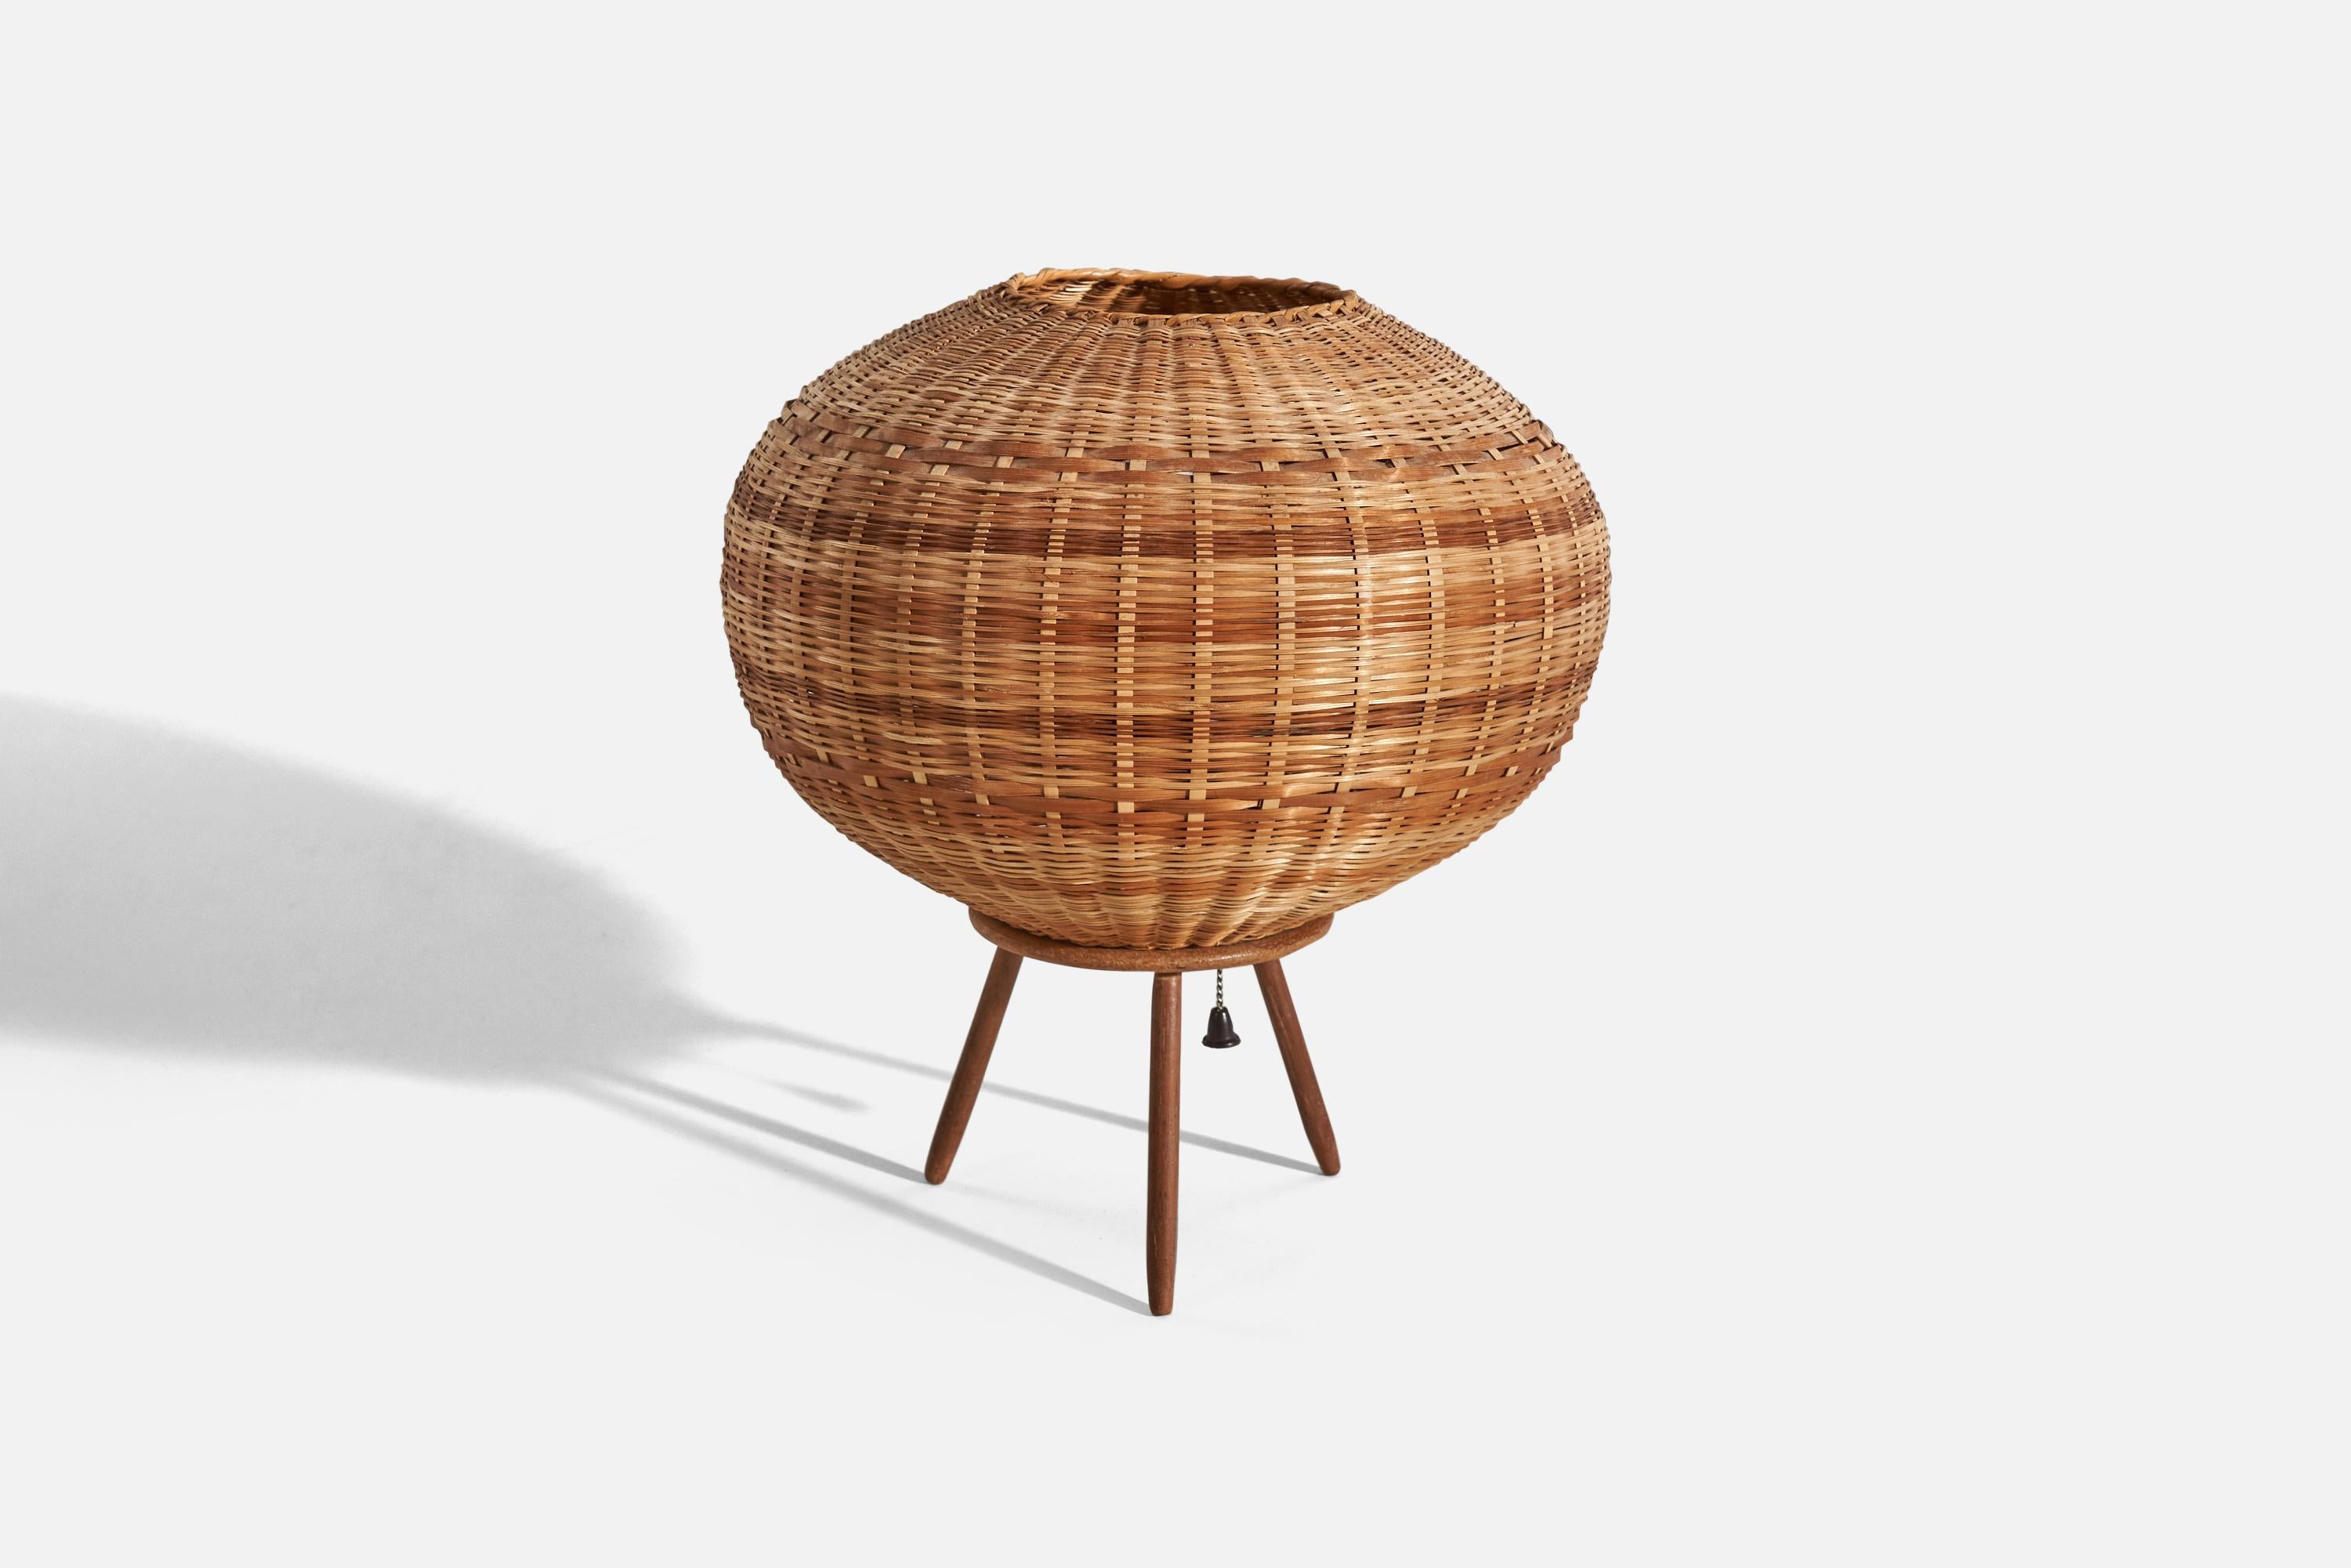 A wicker and teak table lamp designed and produced in Sweden, c. 1950s.

